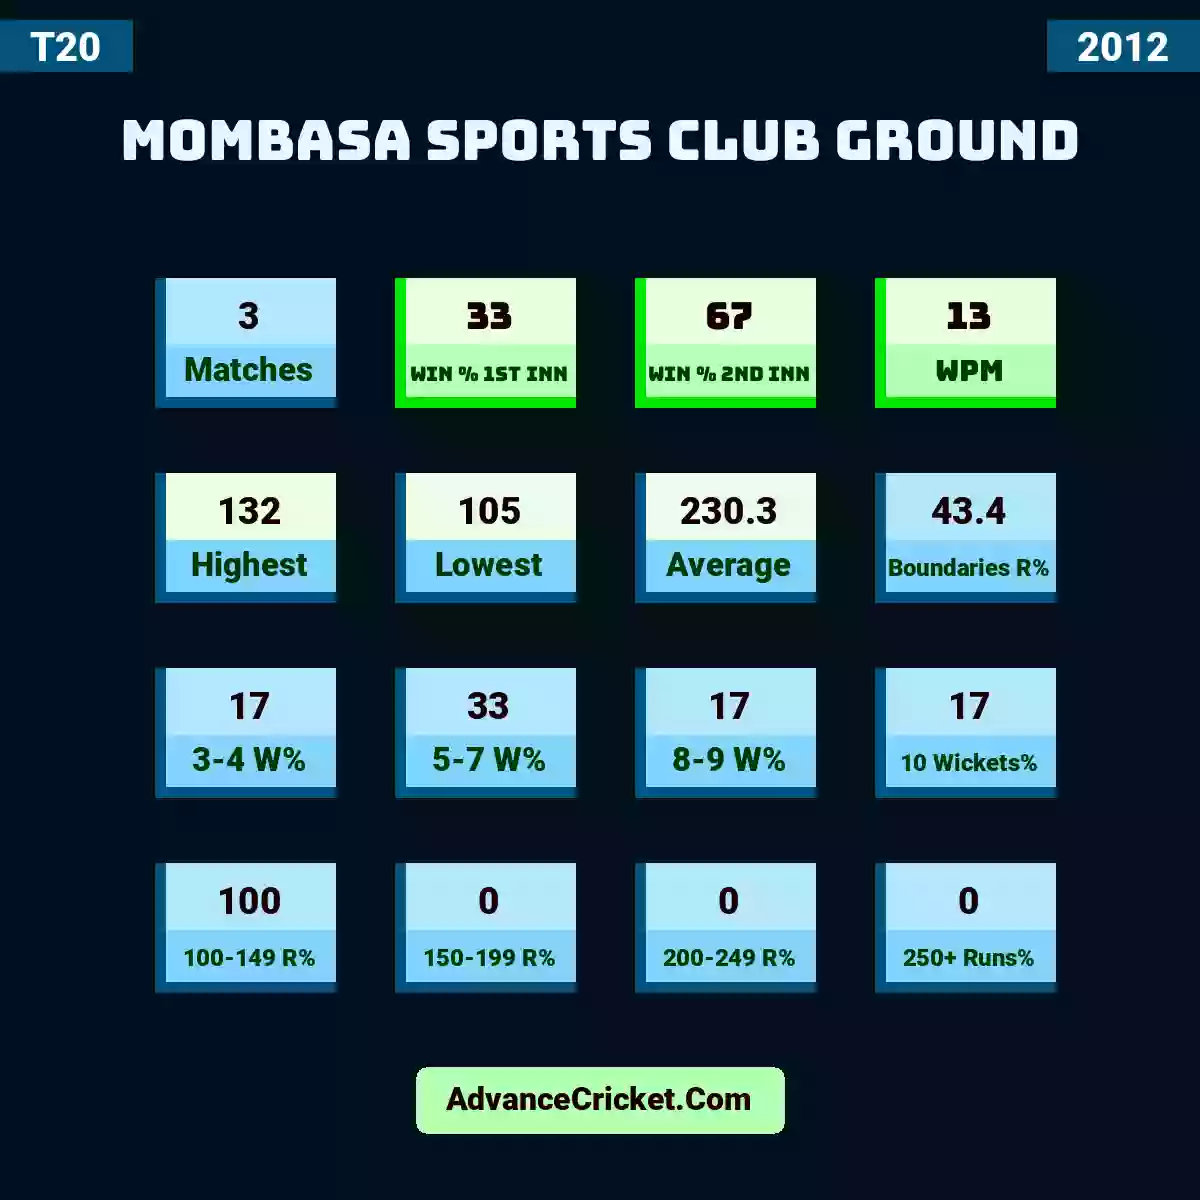 Image showing Mombasa Sports Club Ground with Matches: 3, Win % 1st Inn: 33, Win % 2nd Inn: 67, WPM: 13, Highest: 132, Lowest: 105, Average: 230.3, Boundaries R%: 43.4, 3-4 W%: 17, 5-7 W%: 33, 8-9 W%: 17, 10 Wickets%: 17, 100-149 R%: 100, 150-199 R%: 0, 200-249 R%: 0, 250+ Runs%: 0.